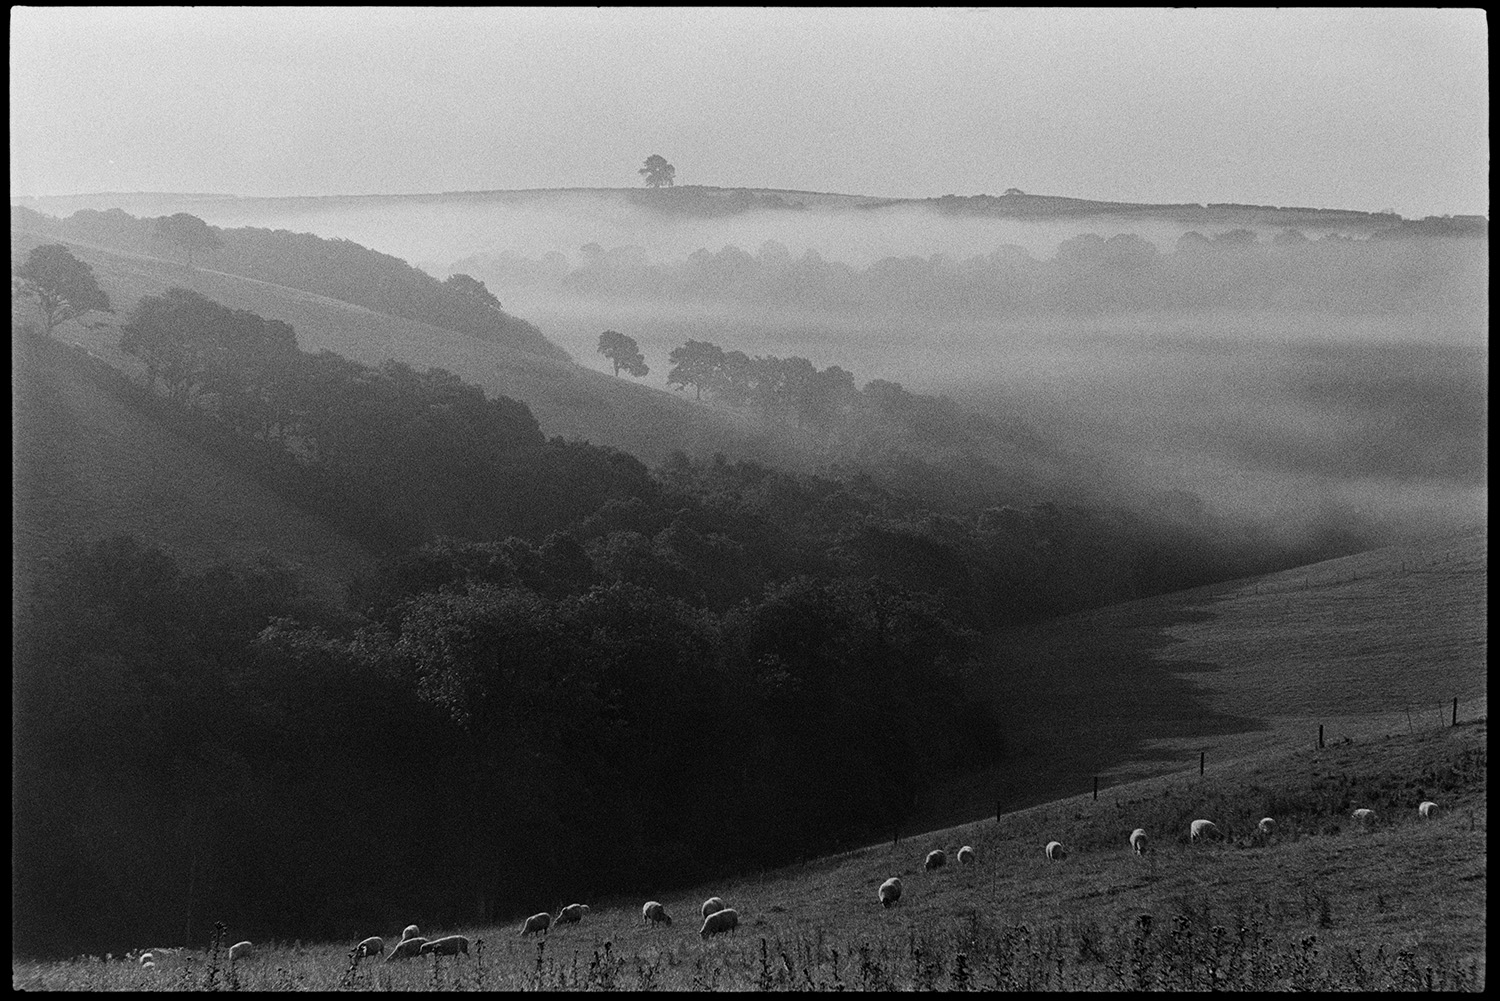 Misty landscape with sheep early morning. 
[Sheep grazing in a field at Densham, Ashreigney, in the early morning. The hillsides in the background are covered with mist.]